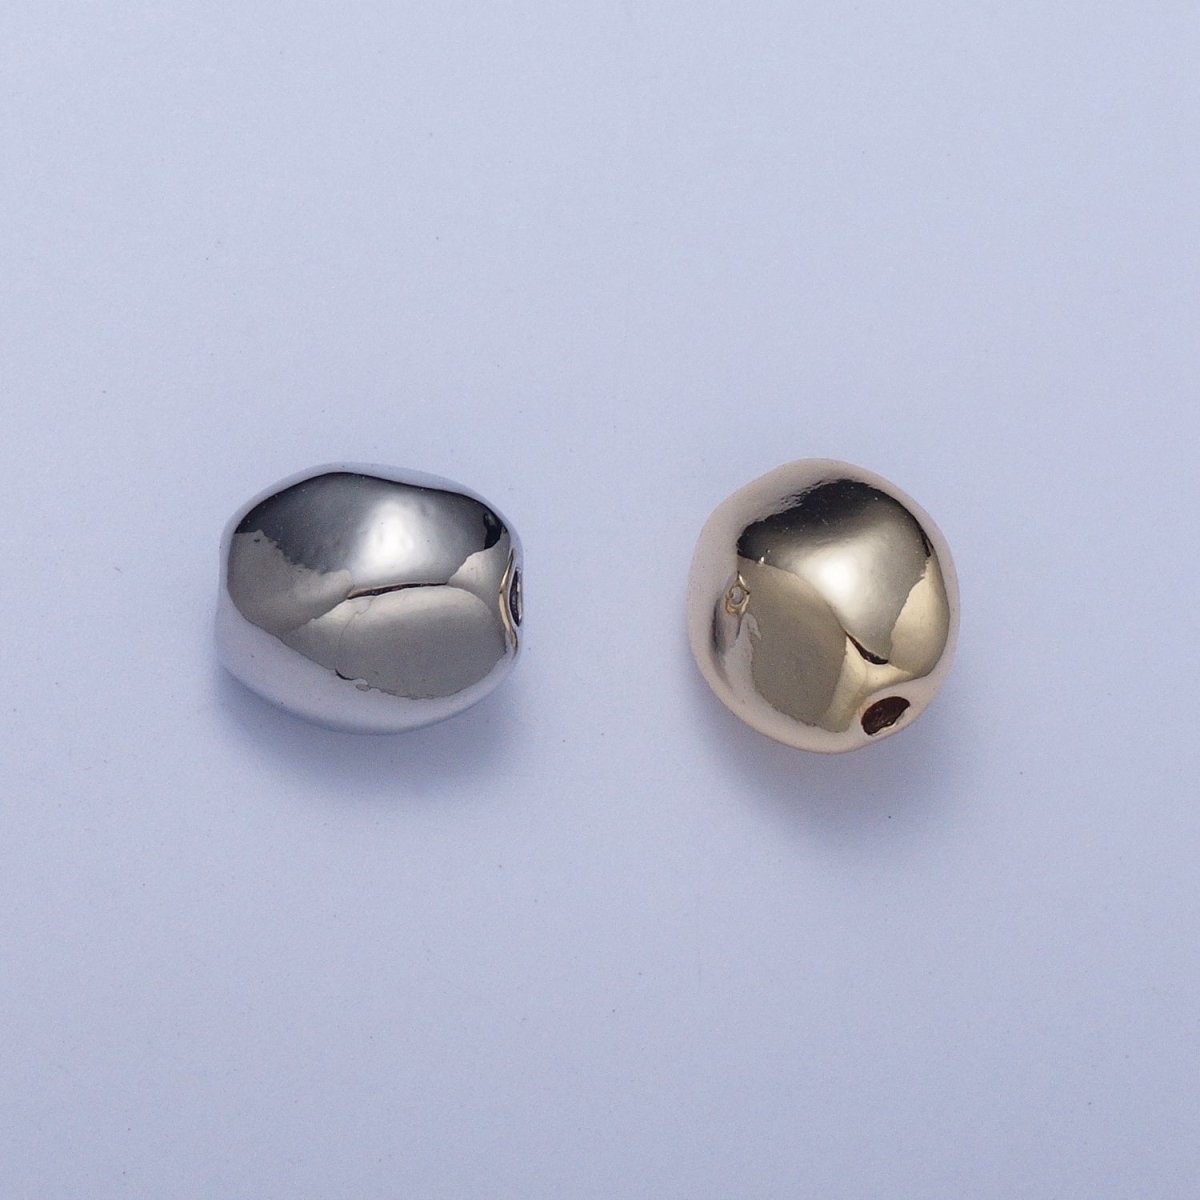 Pieces Pack Abstract Oval 7mmx6.5mm Geometric Spacer Beads Jewelry Findings in Gold & Silver B-097 B-101 - DLUXCA